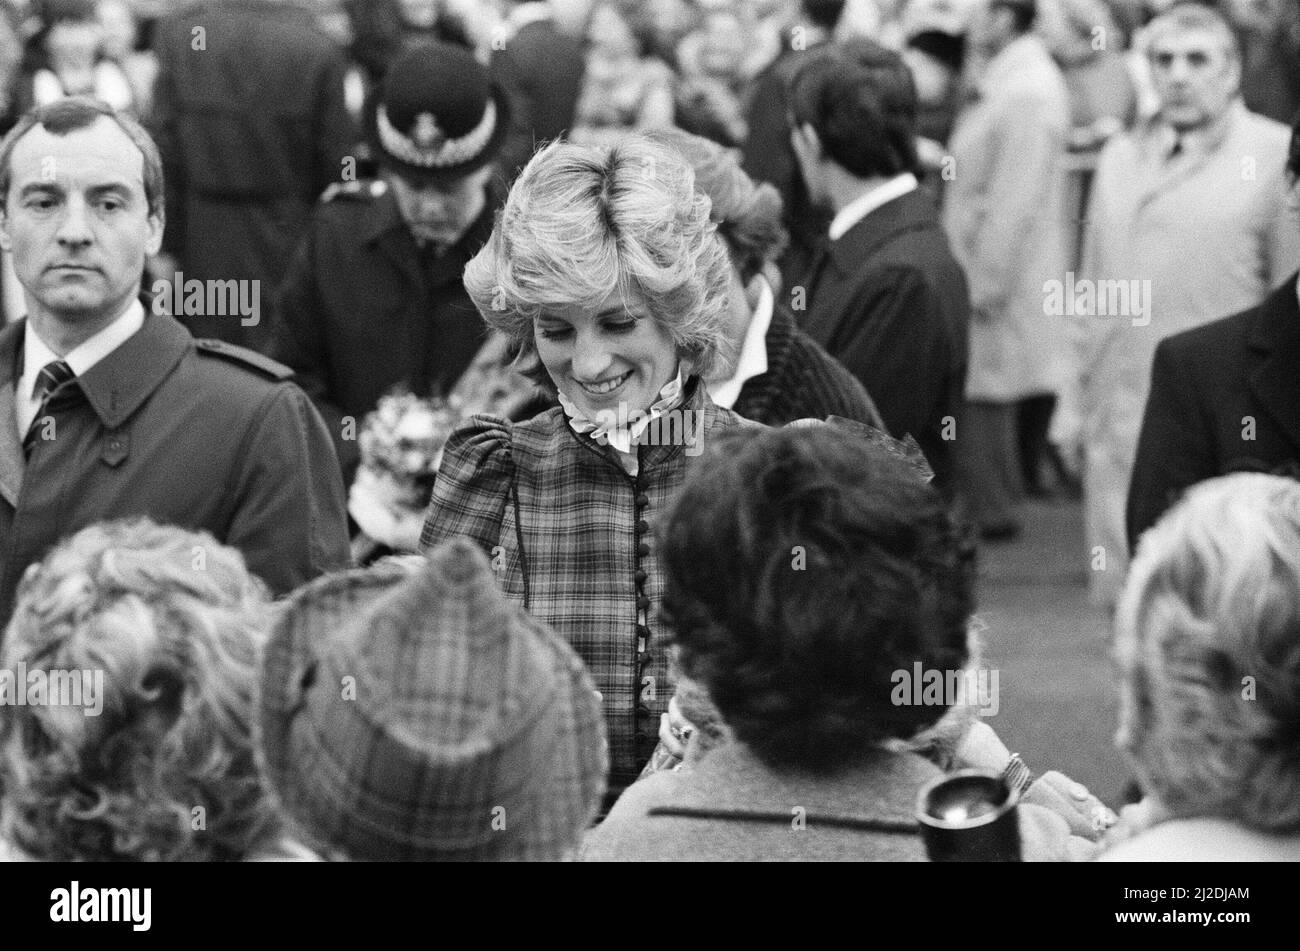 The Prince and Princess of Wales visit Mid Glamorgan in Wales.On this visit, they meet the local well-wishers outside a newly electronics plant.  Picture shows Princess Diana and behind her, her bodyguard Barry Mannakee wearing a diagonal striped tie and overcoat/mac.  See other frames in this set wear Mr Mannakee has taken this coat off and is wearing a slight pin striped suit.  Picture taken 29th January 1985 Stock Photo